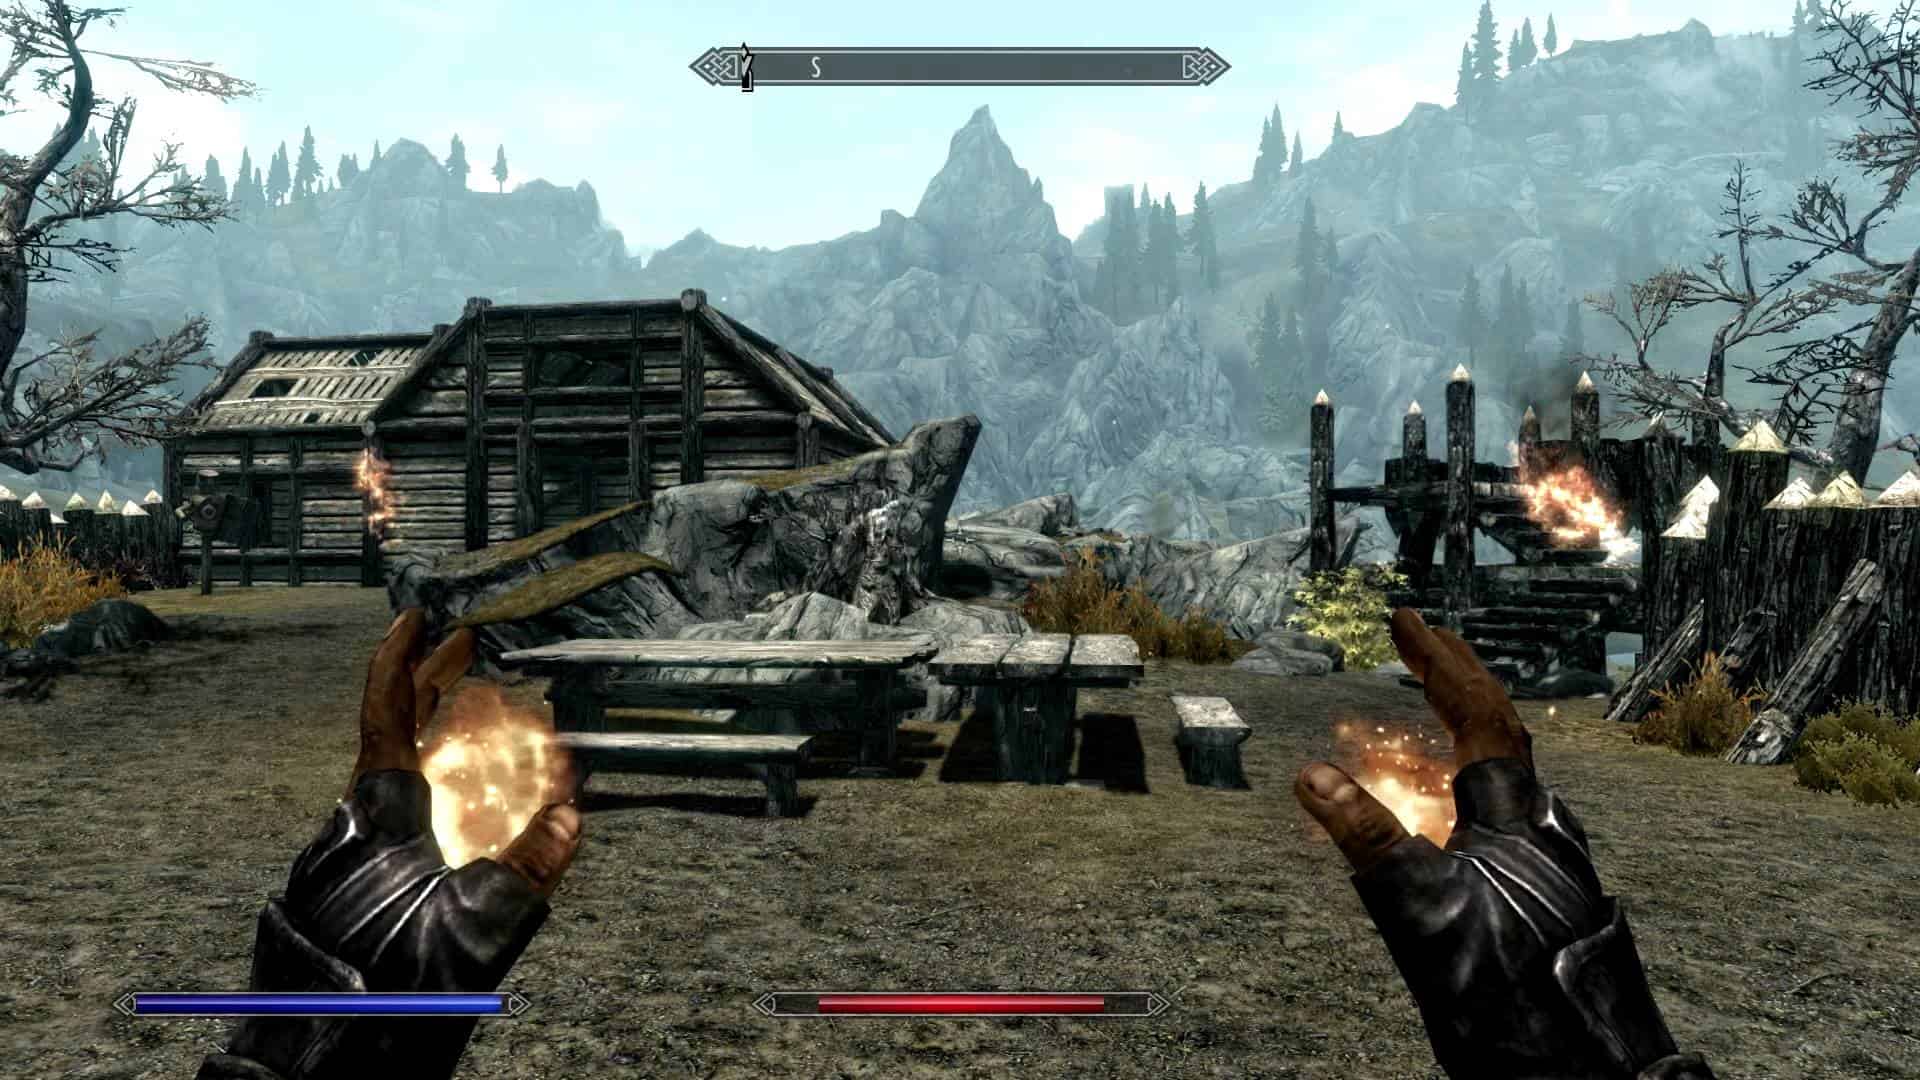 Screenshot from the game Skyrim. The player is facing some mountains and a wooden shed wielding a fireball spell in their hands.